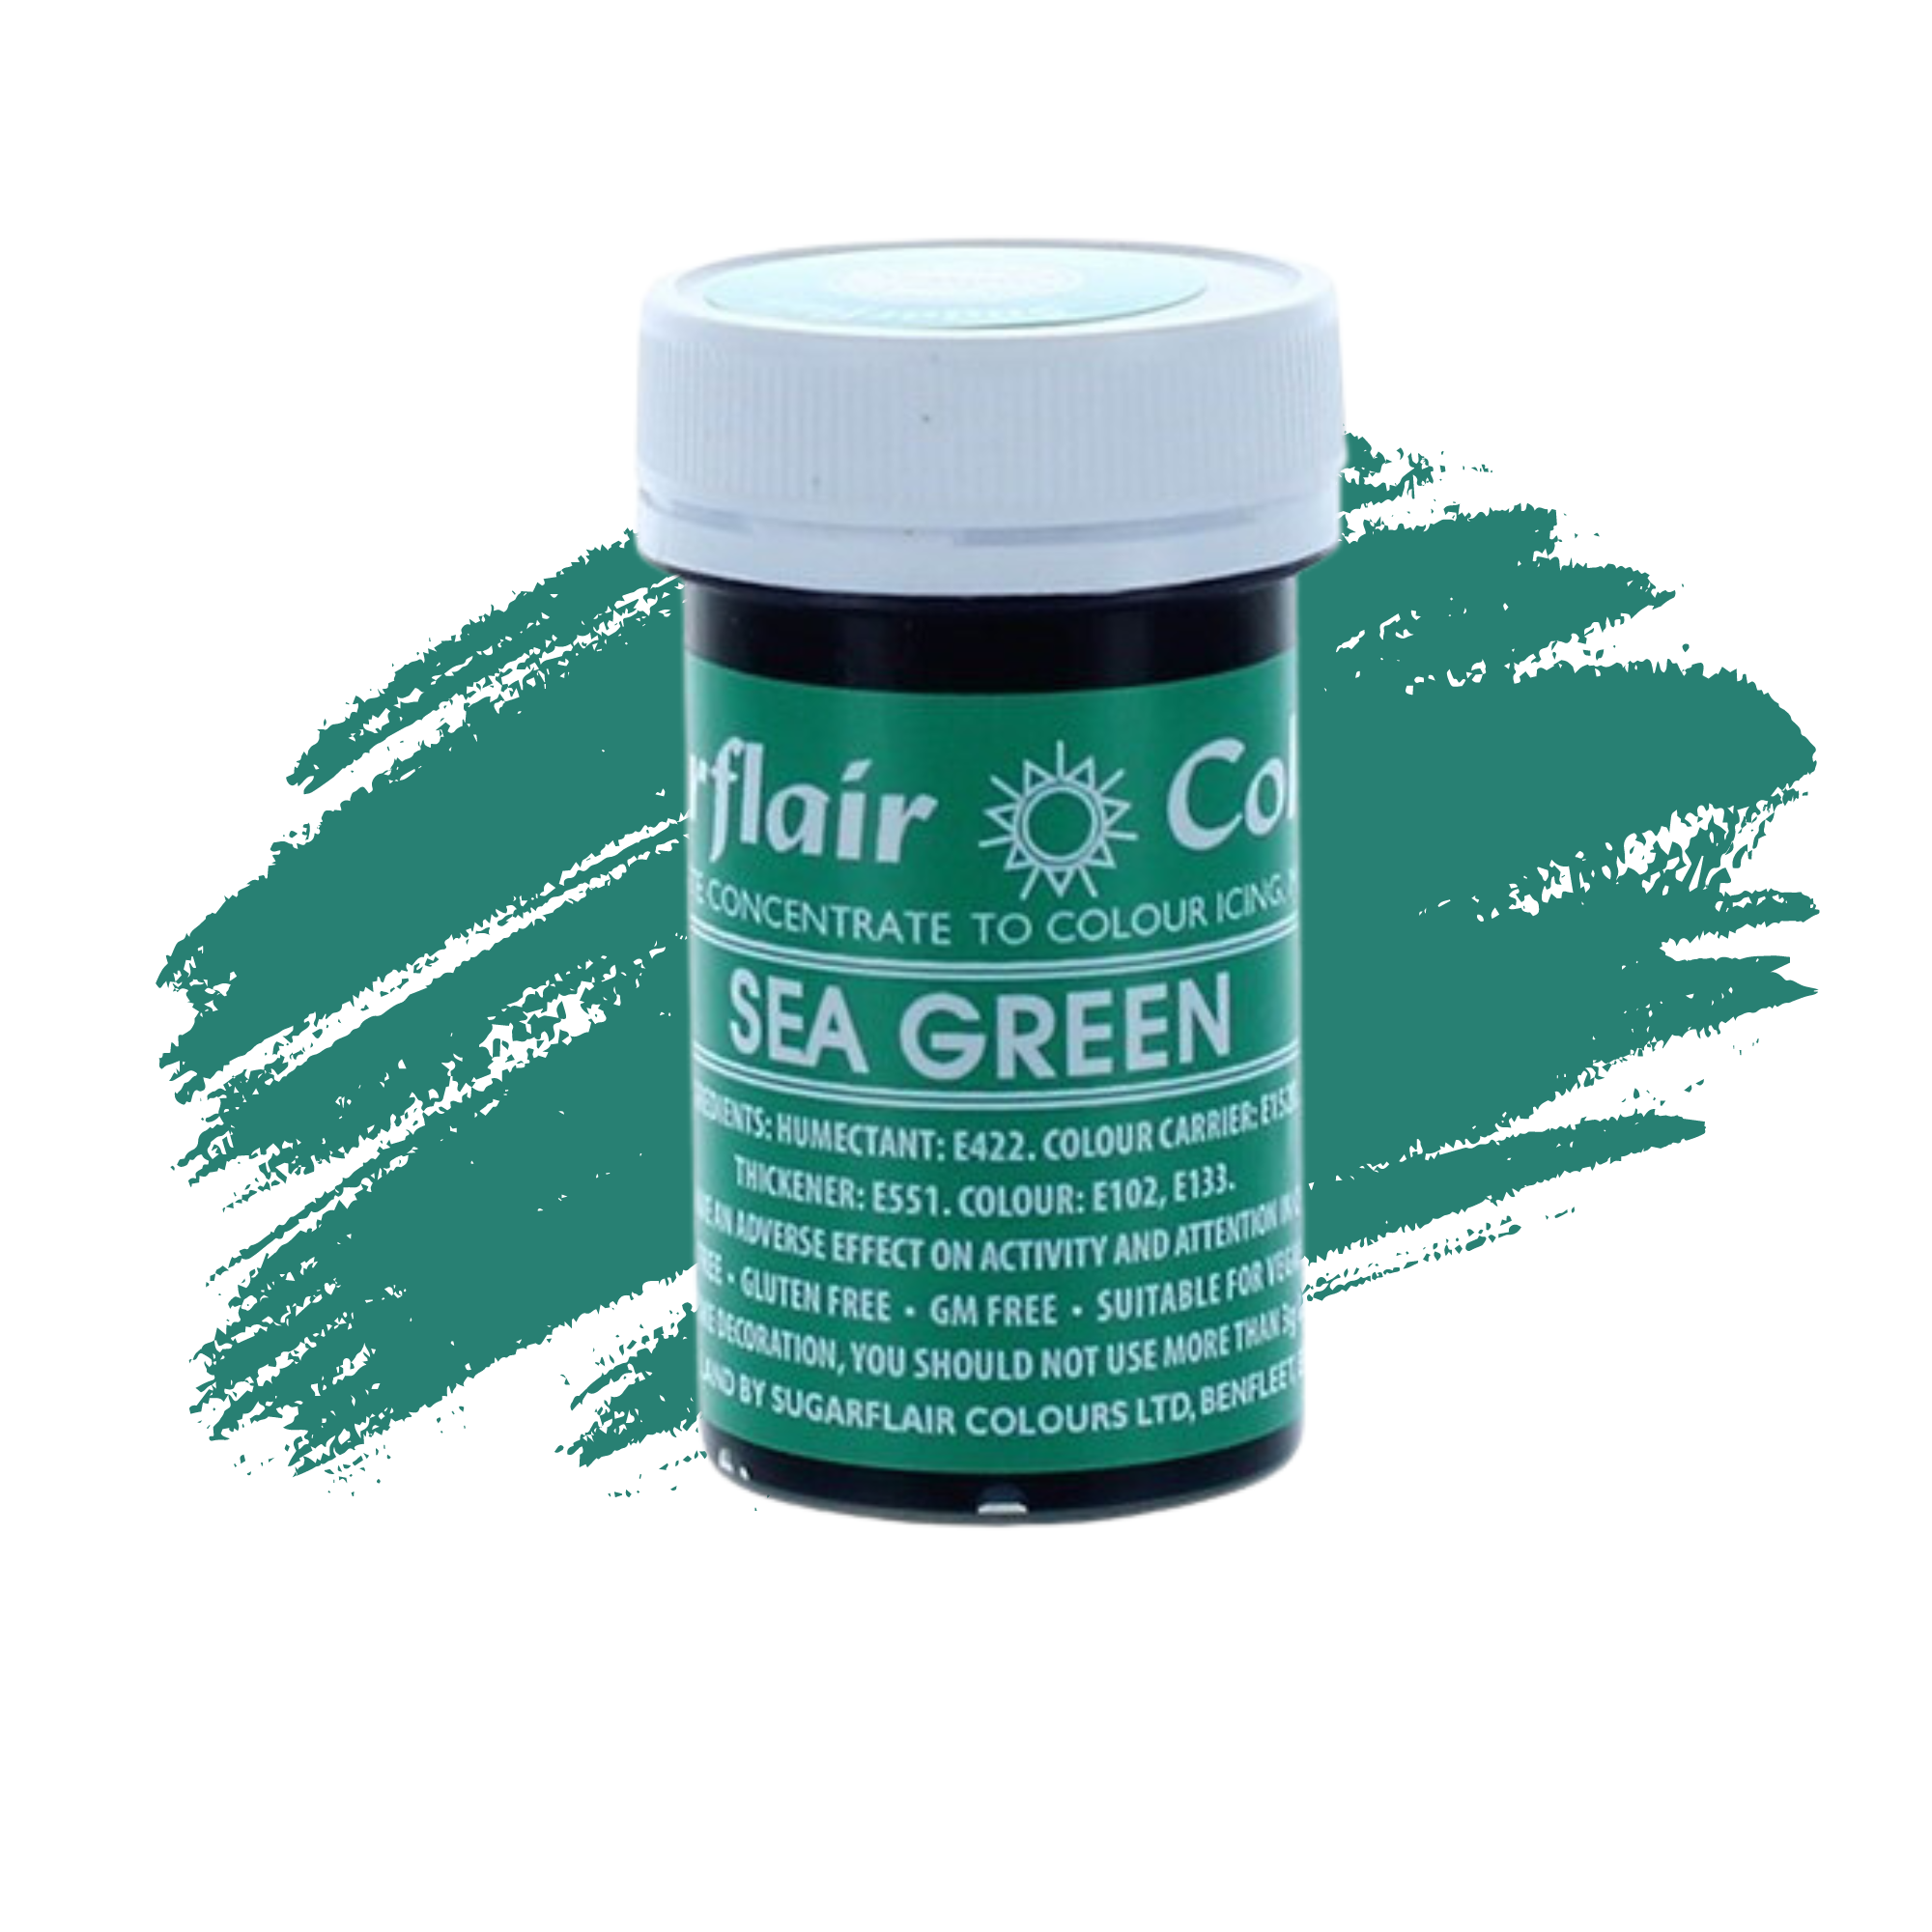 Sugarflair Paste Colours Concentrated Food Colouring - Spectral Sea Green - 25g